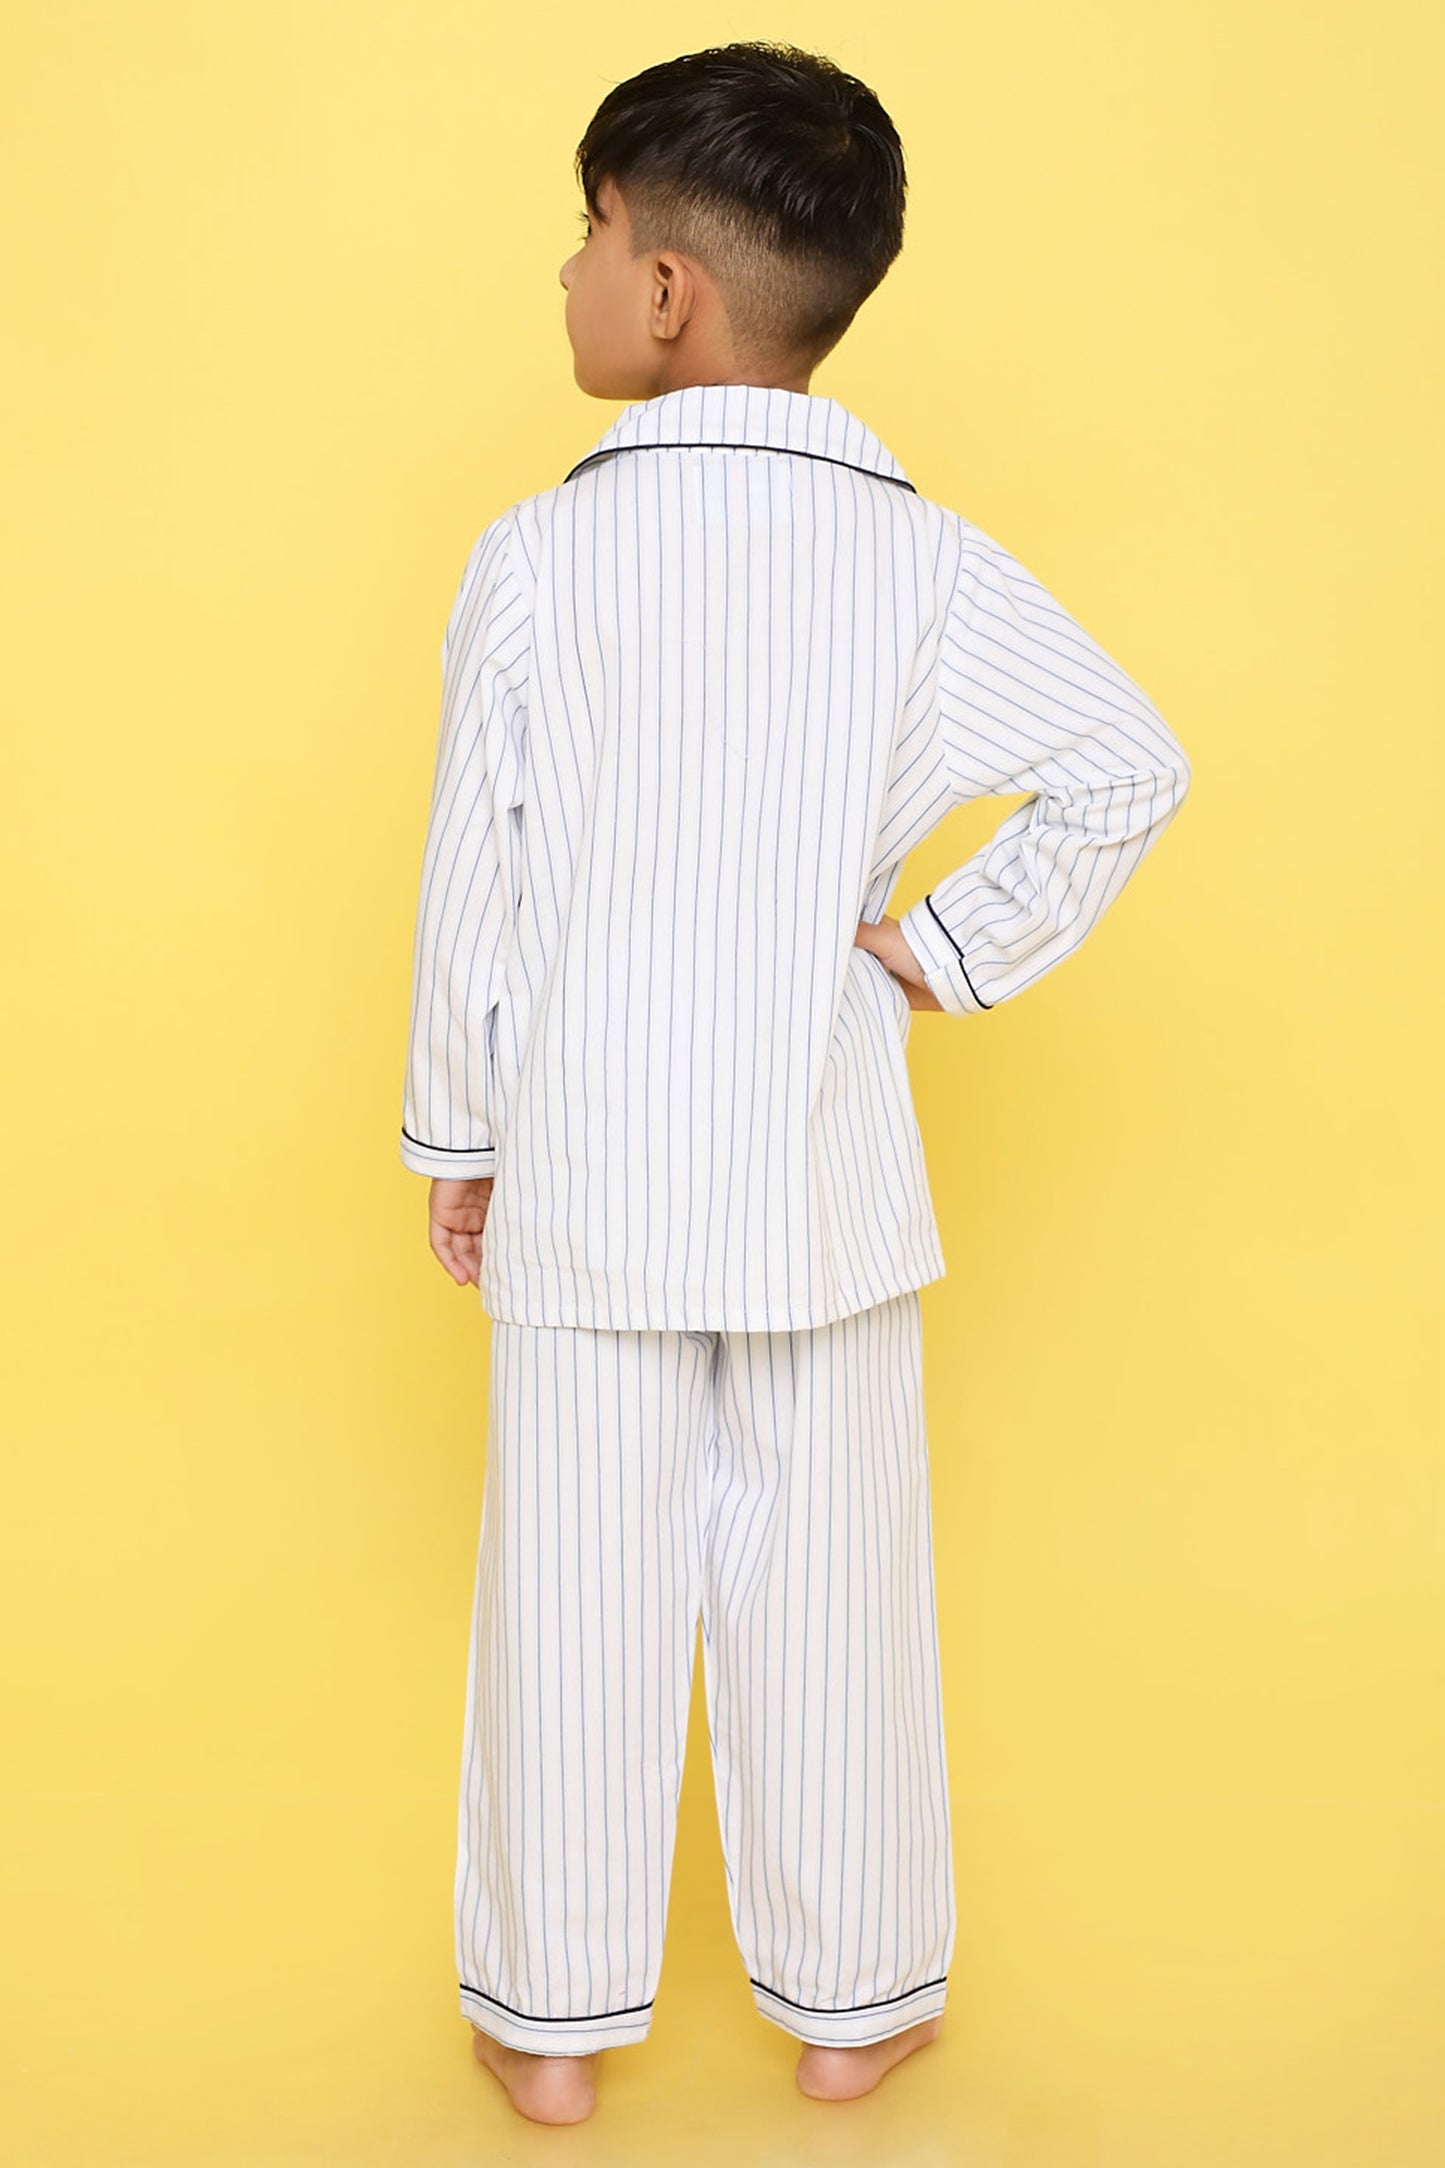 Knitting Doodles Premium Cotton Kids' Stripes Night suit with Live, Love soccer embroidery on pocket- White